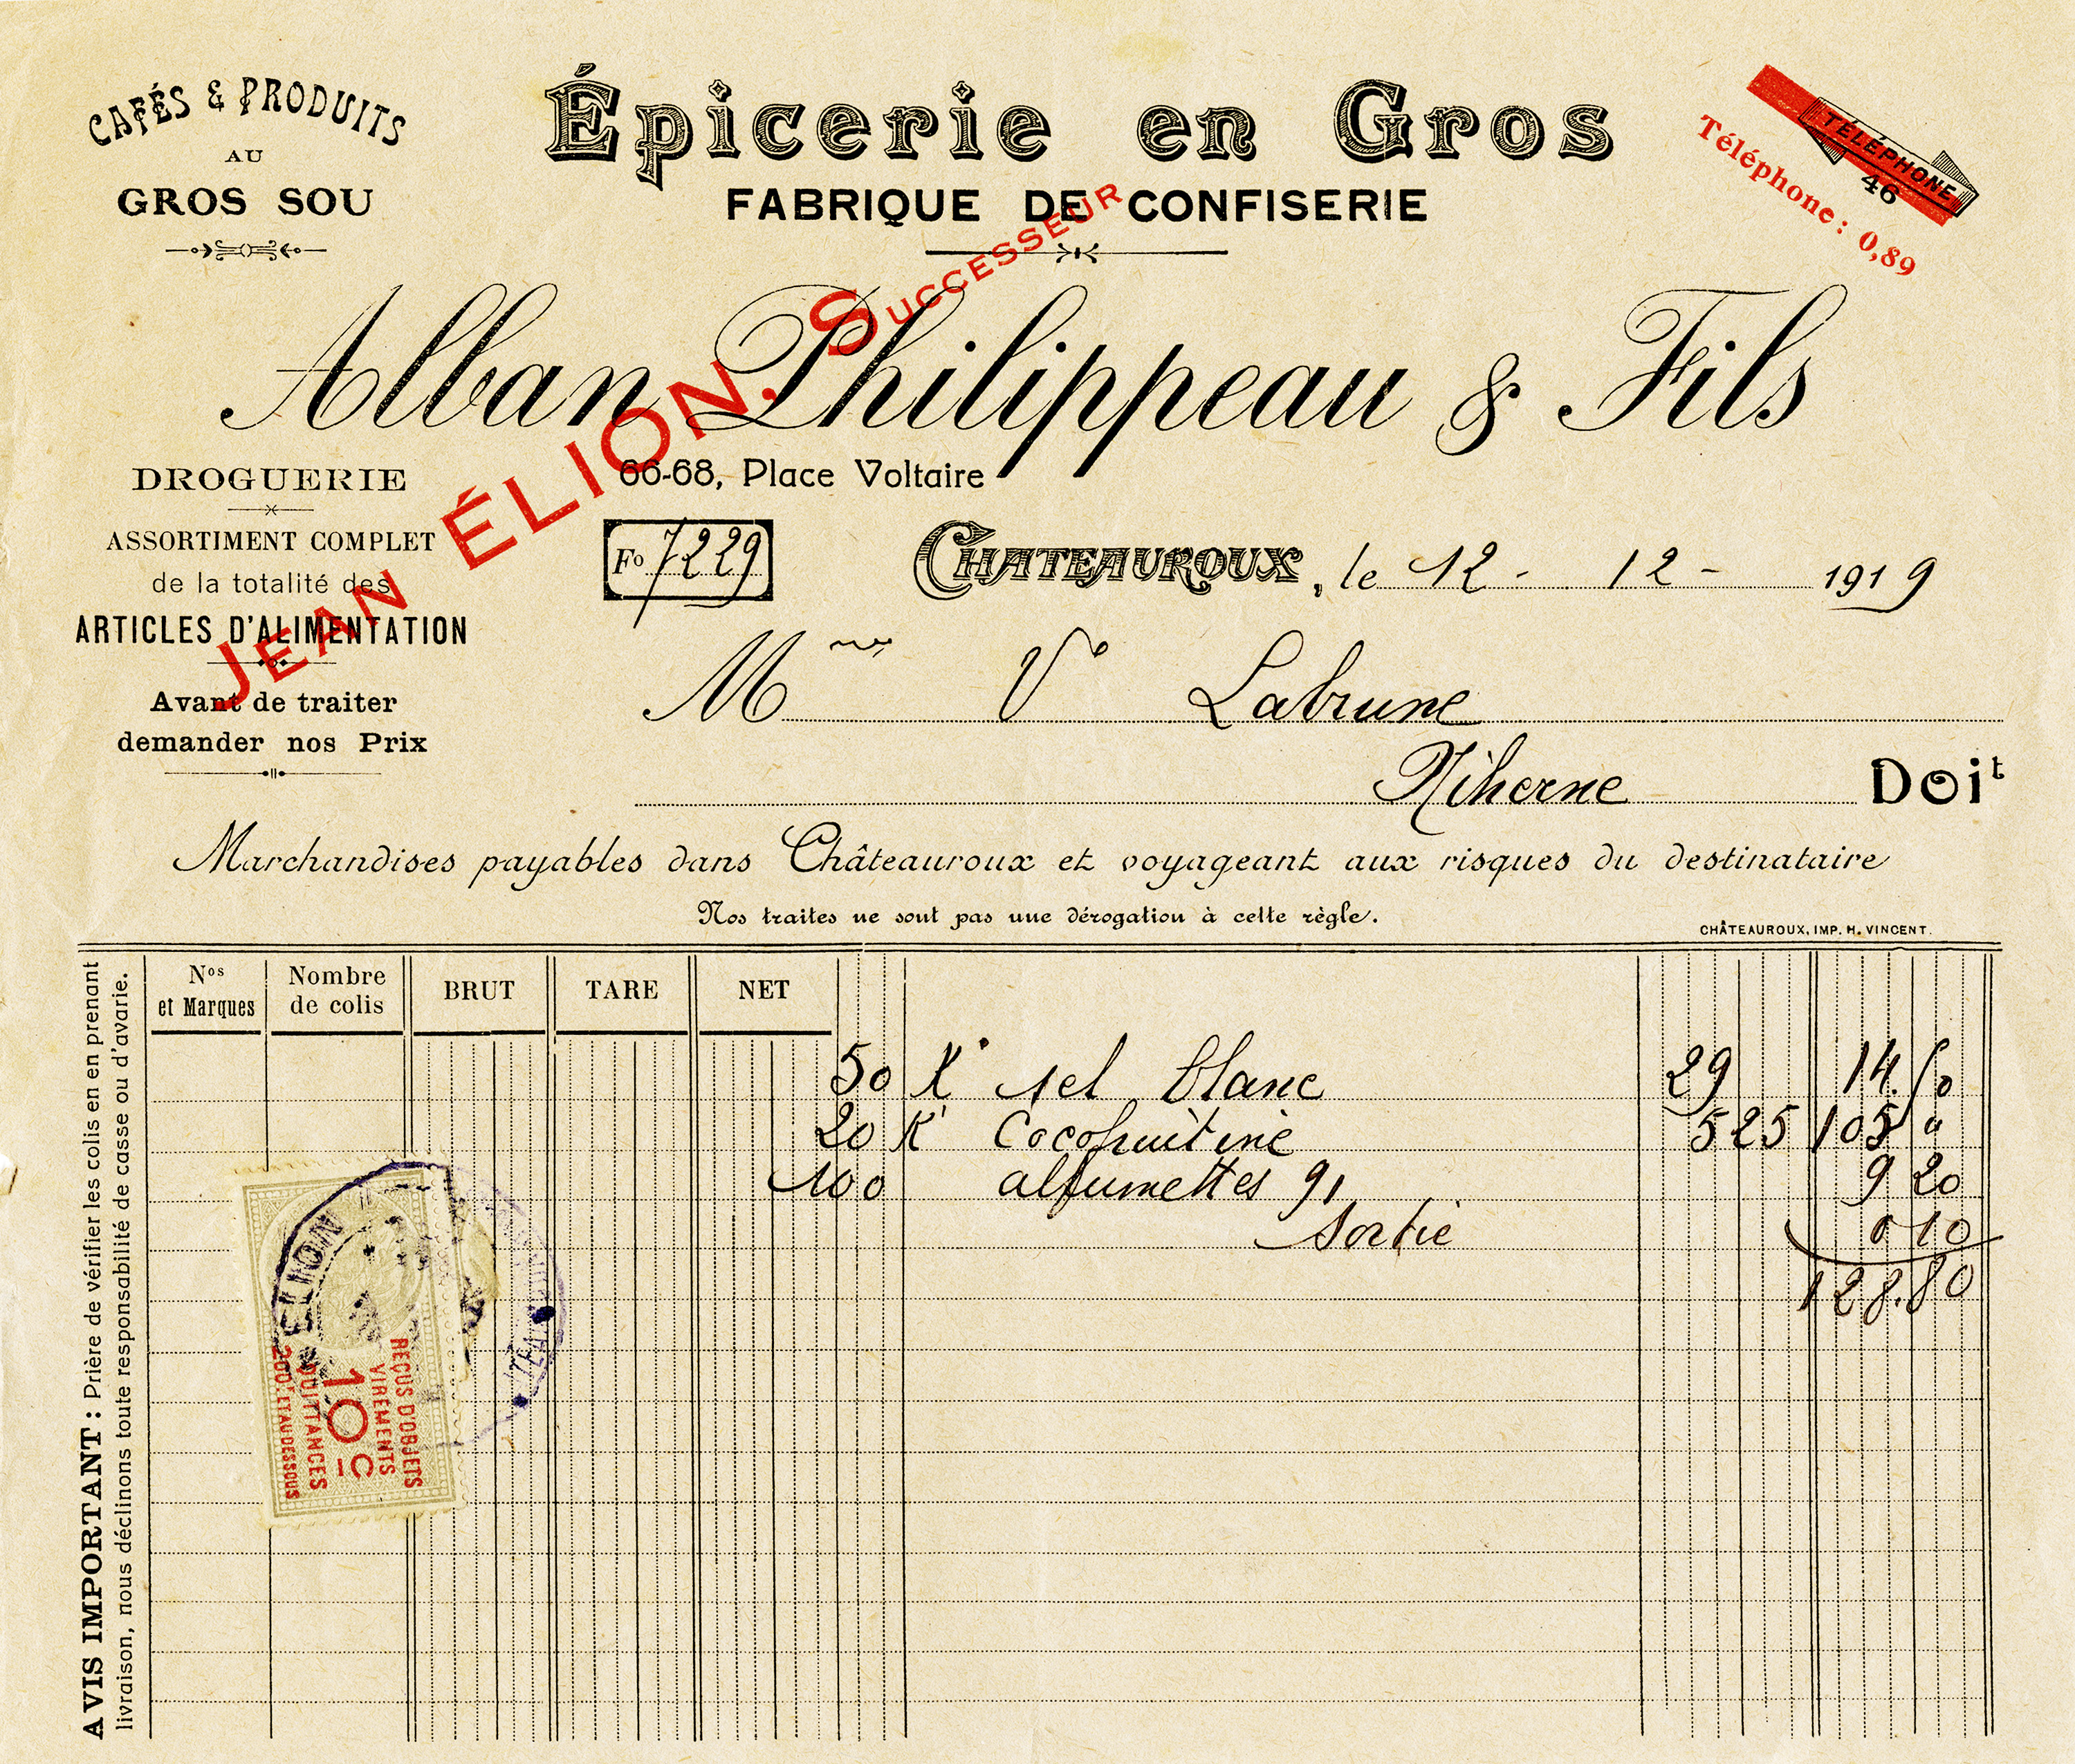 vintage French invoice, digital French receipt, antique accounting, old paper graphic, aged ephemera free